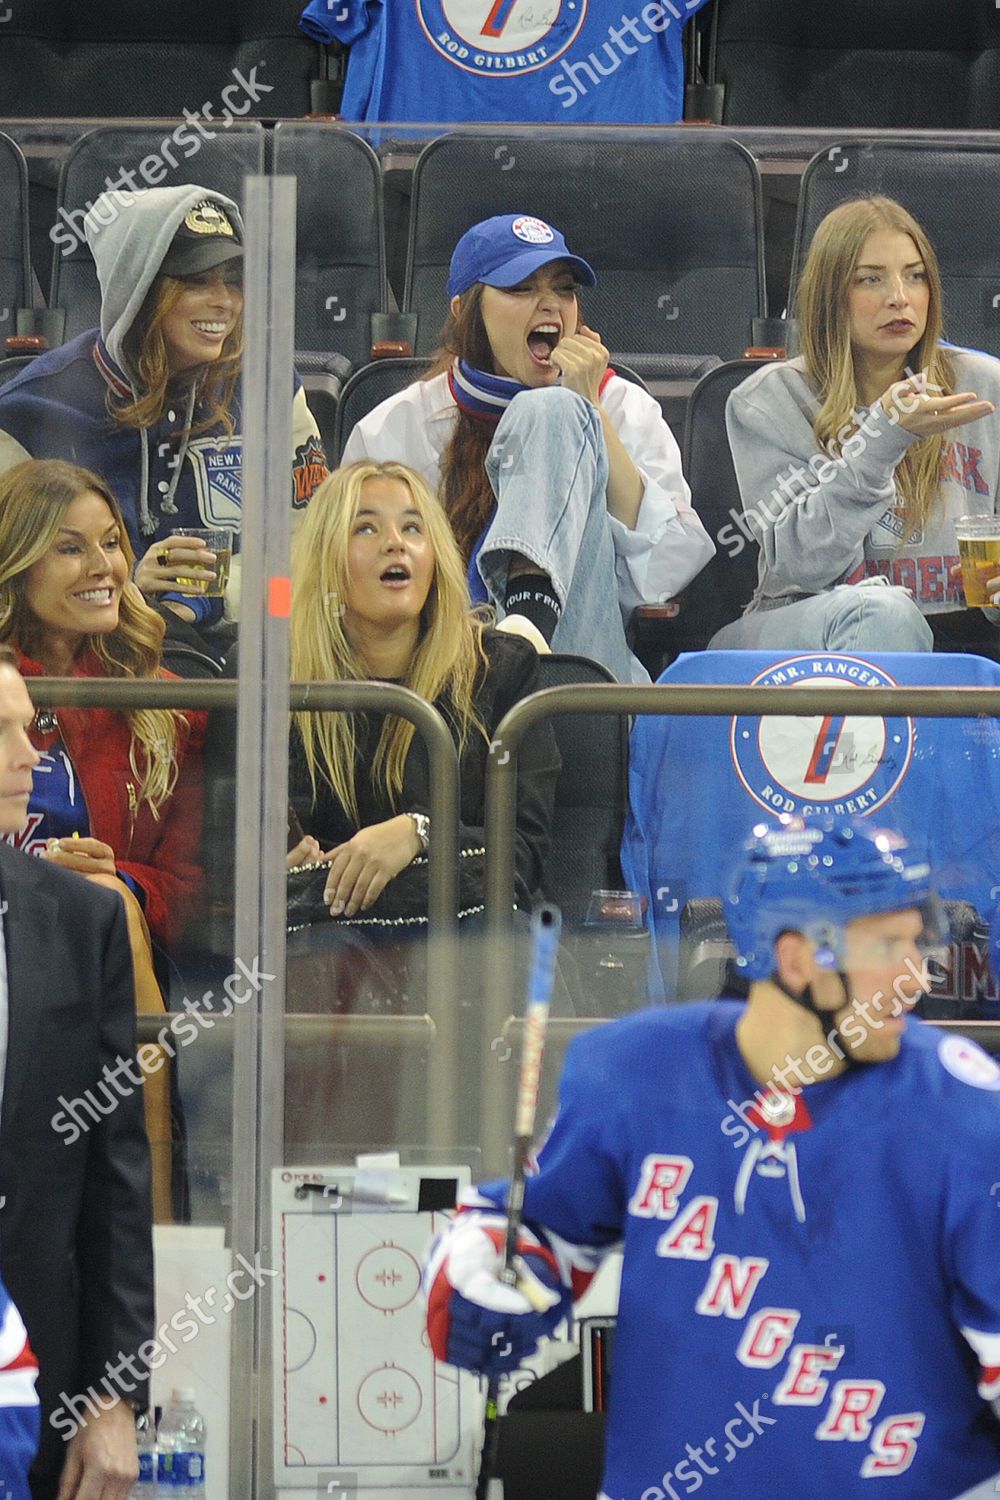 (REQUEST): October 14: Gigi hadid at the Rangers Home Opener for the 2021-21 NHL hockey season at Madison Square Garden in NYC